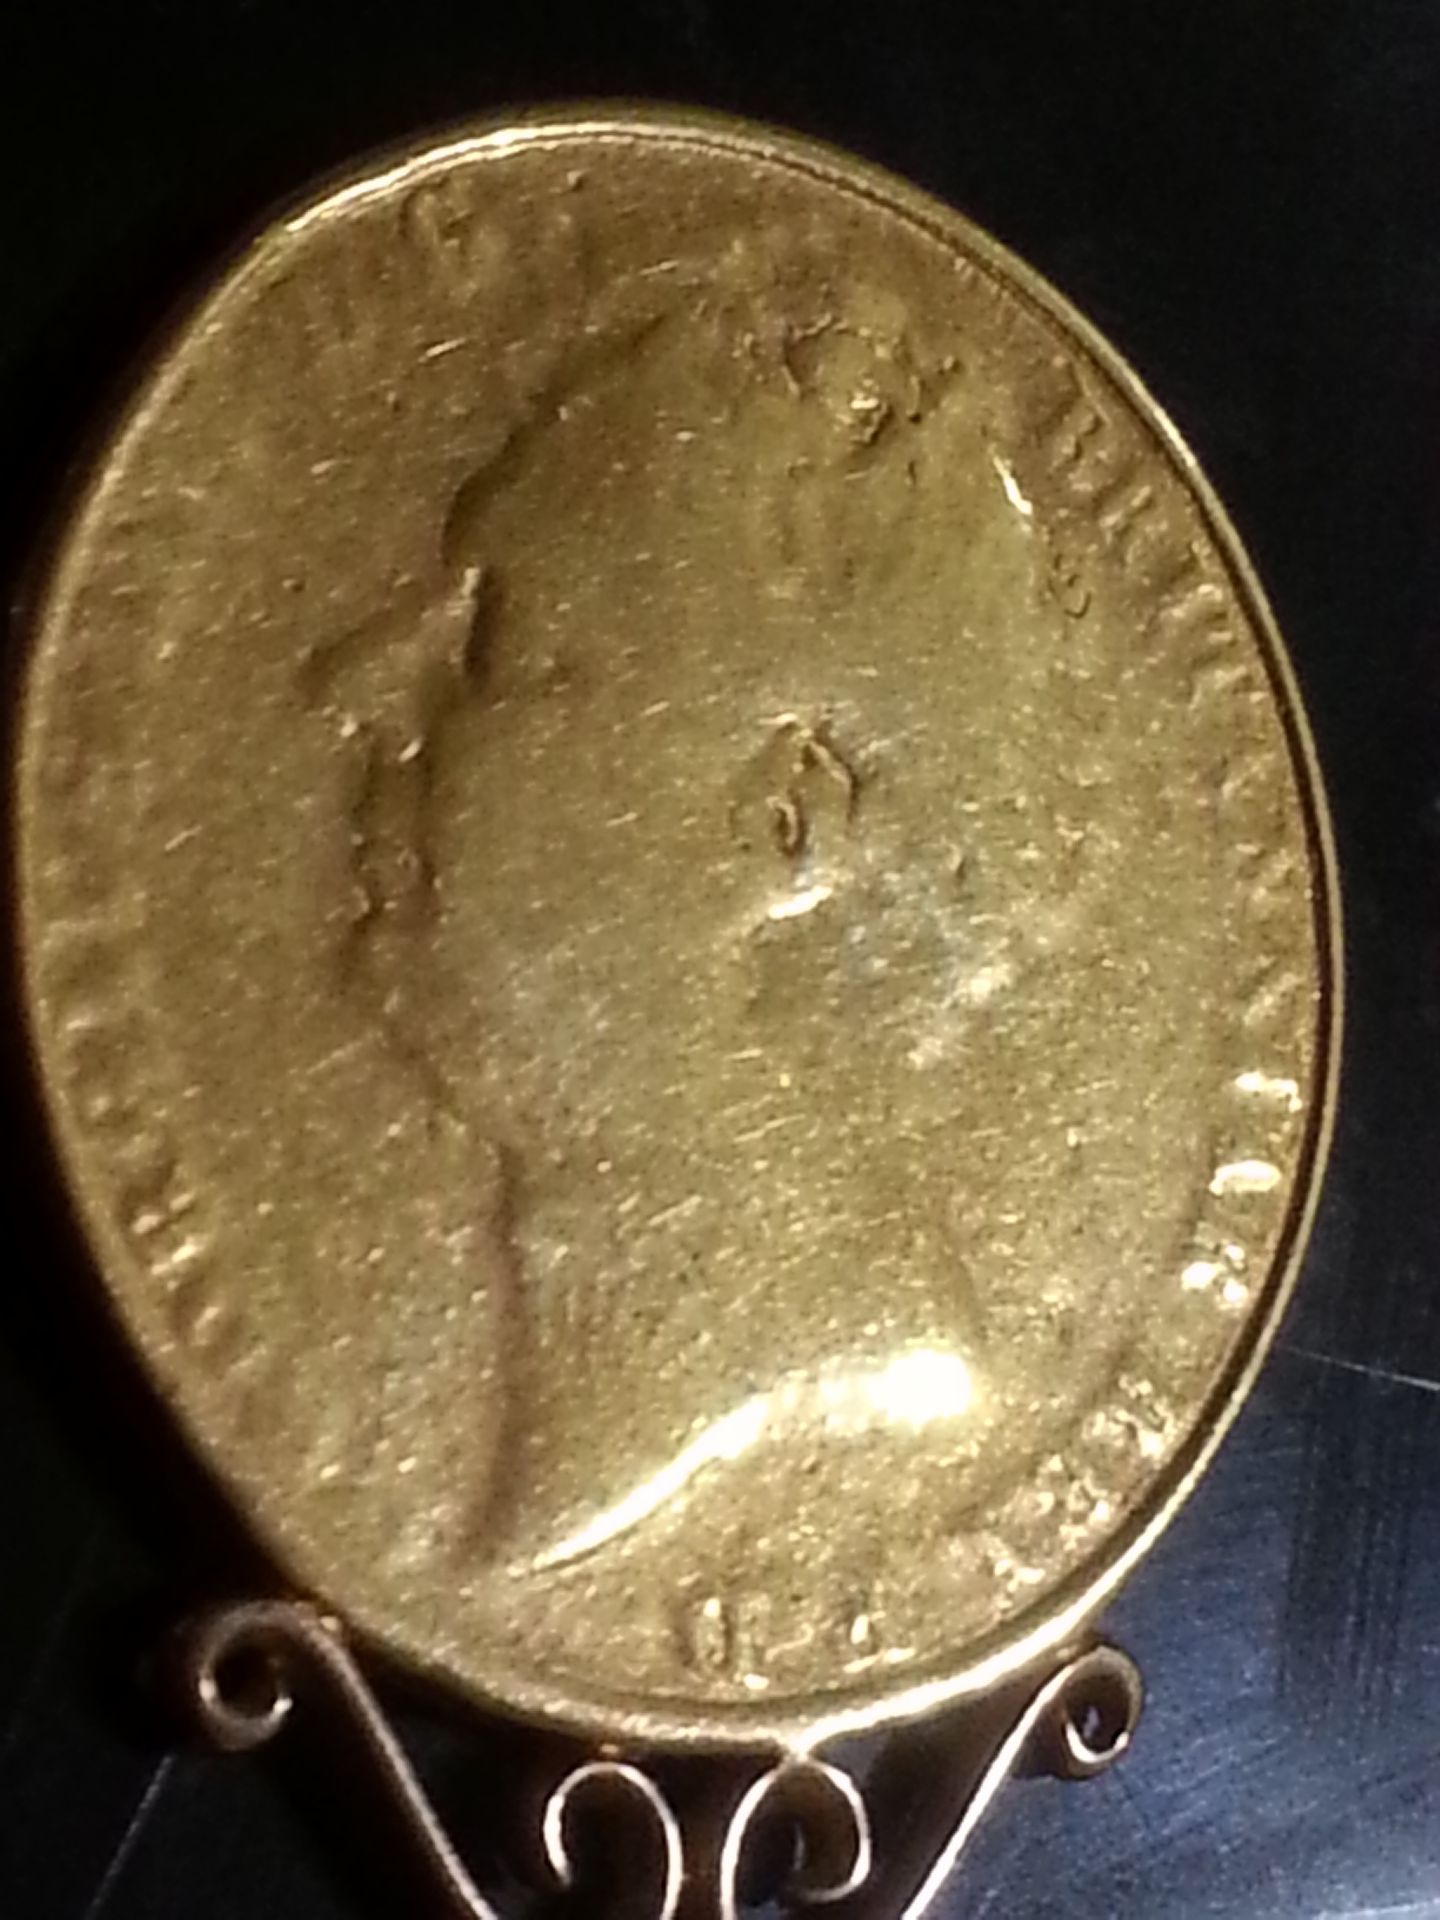 A RARE George IV 1823 AV GOLD Two Pounds Sovereign mounted on 18 ct gold crown. - Image 3 of 3